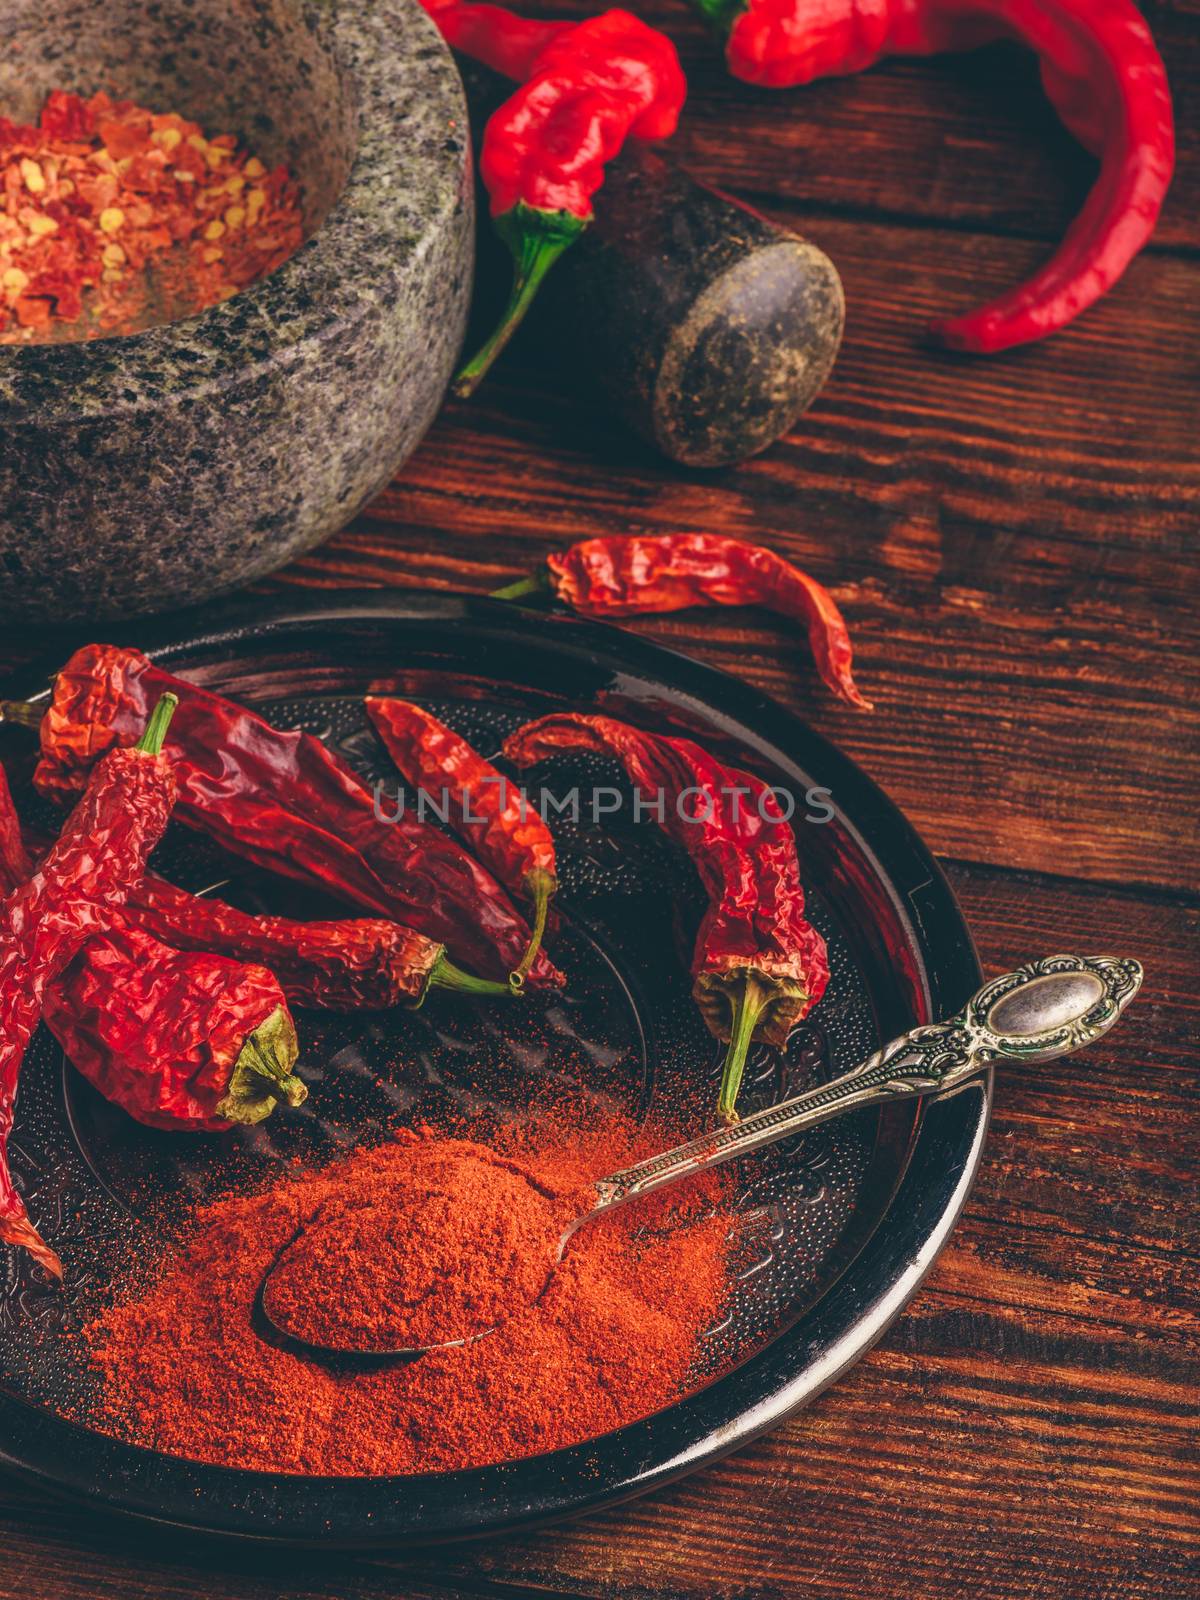 Ground and dried red chili peppers by Seva_blsv